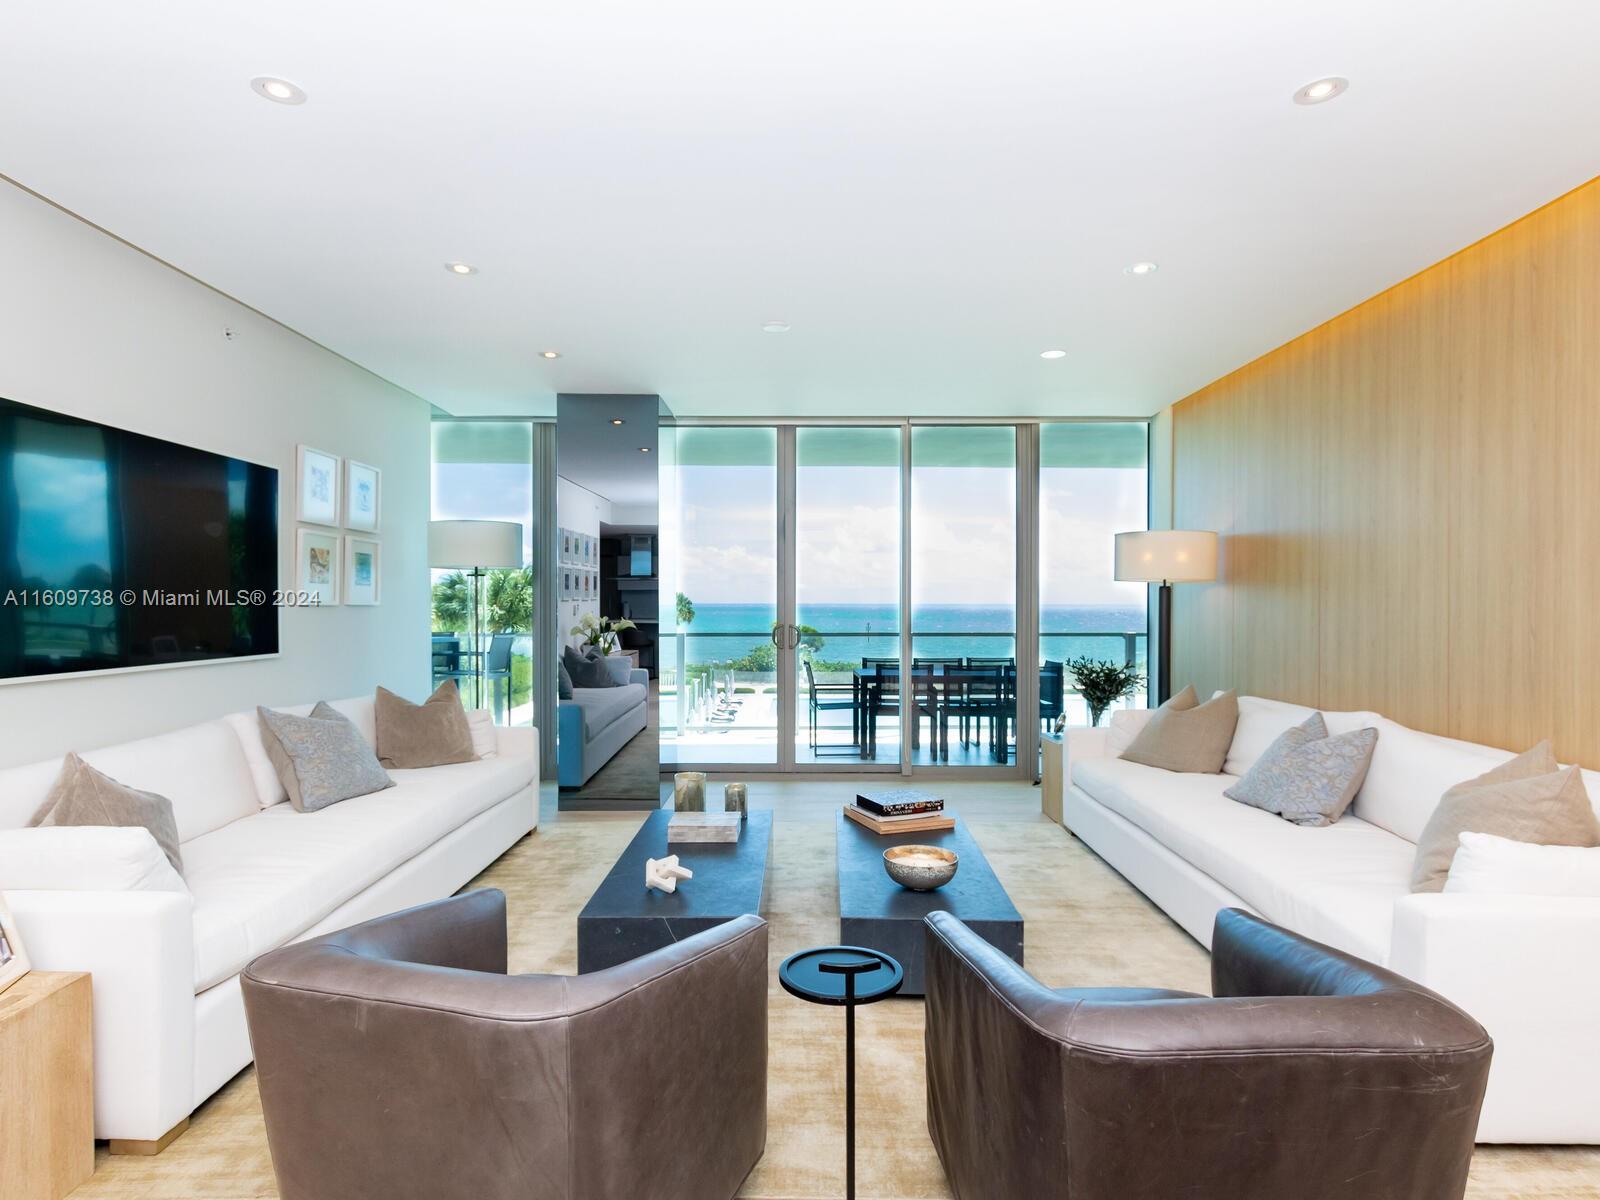 Unobstructed & tranquil oceanfront views in this unique, tastefully decorated unit at the exclusive
Oceana in Key Biscayne. Unit features a spacious & practical layout 2B|3.5BA|Den|1,823 SF & private
foyer/elevator entrance. Laundry room has been converted into a third bedroom with a full bathroom inside. Unit
has been substantially renovated. Wooden floors throughout, high ceilings, electric shades & miscellaneous
upgrades throughout. The kitchen features quartz countertops, double oven, wine cooler & custom cabinetry.
Exclusive resort-style amenities such as a beach restaurant with beachfront service, sauna, pool, spa, a fully
equipped gym & private tennis courts.